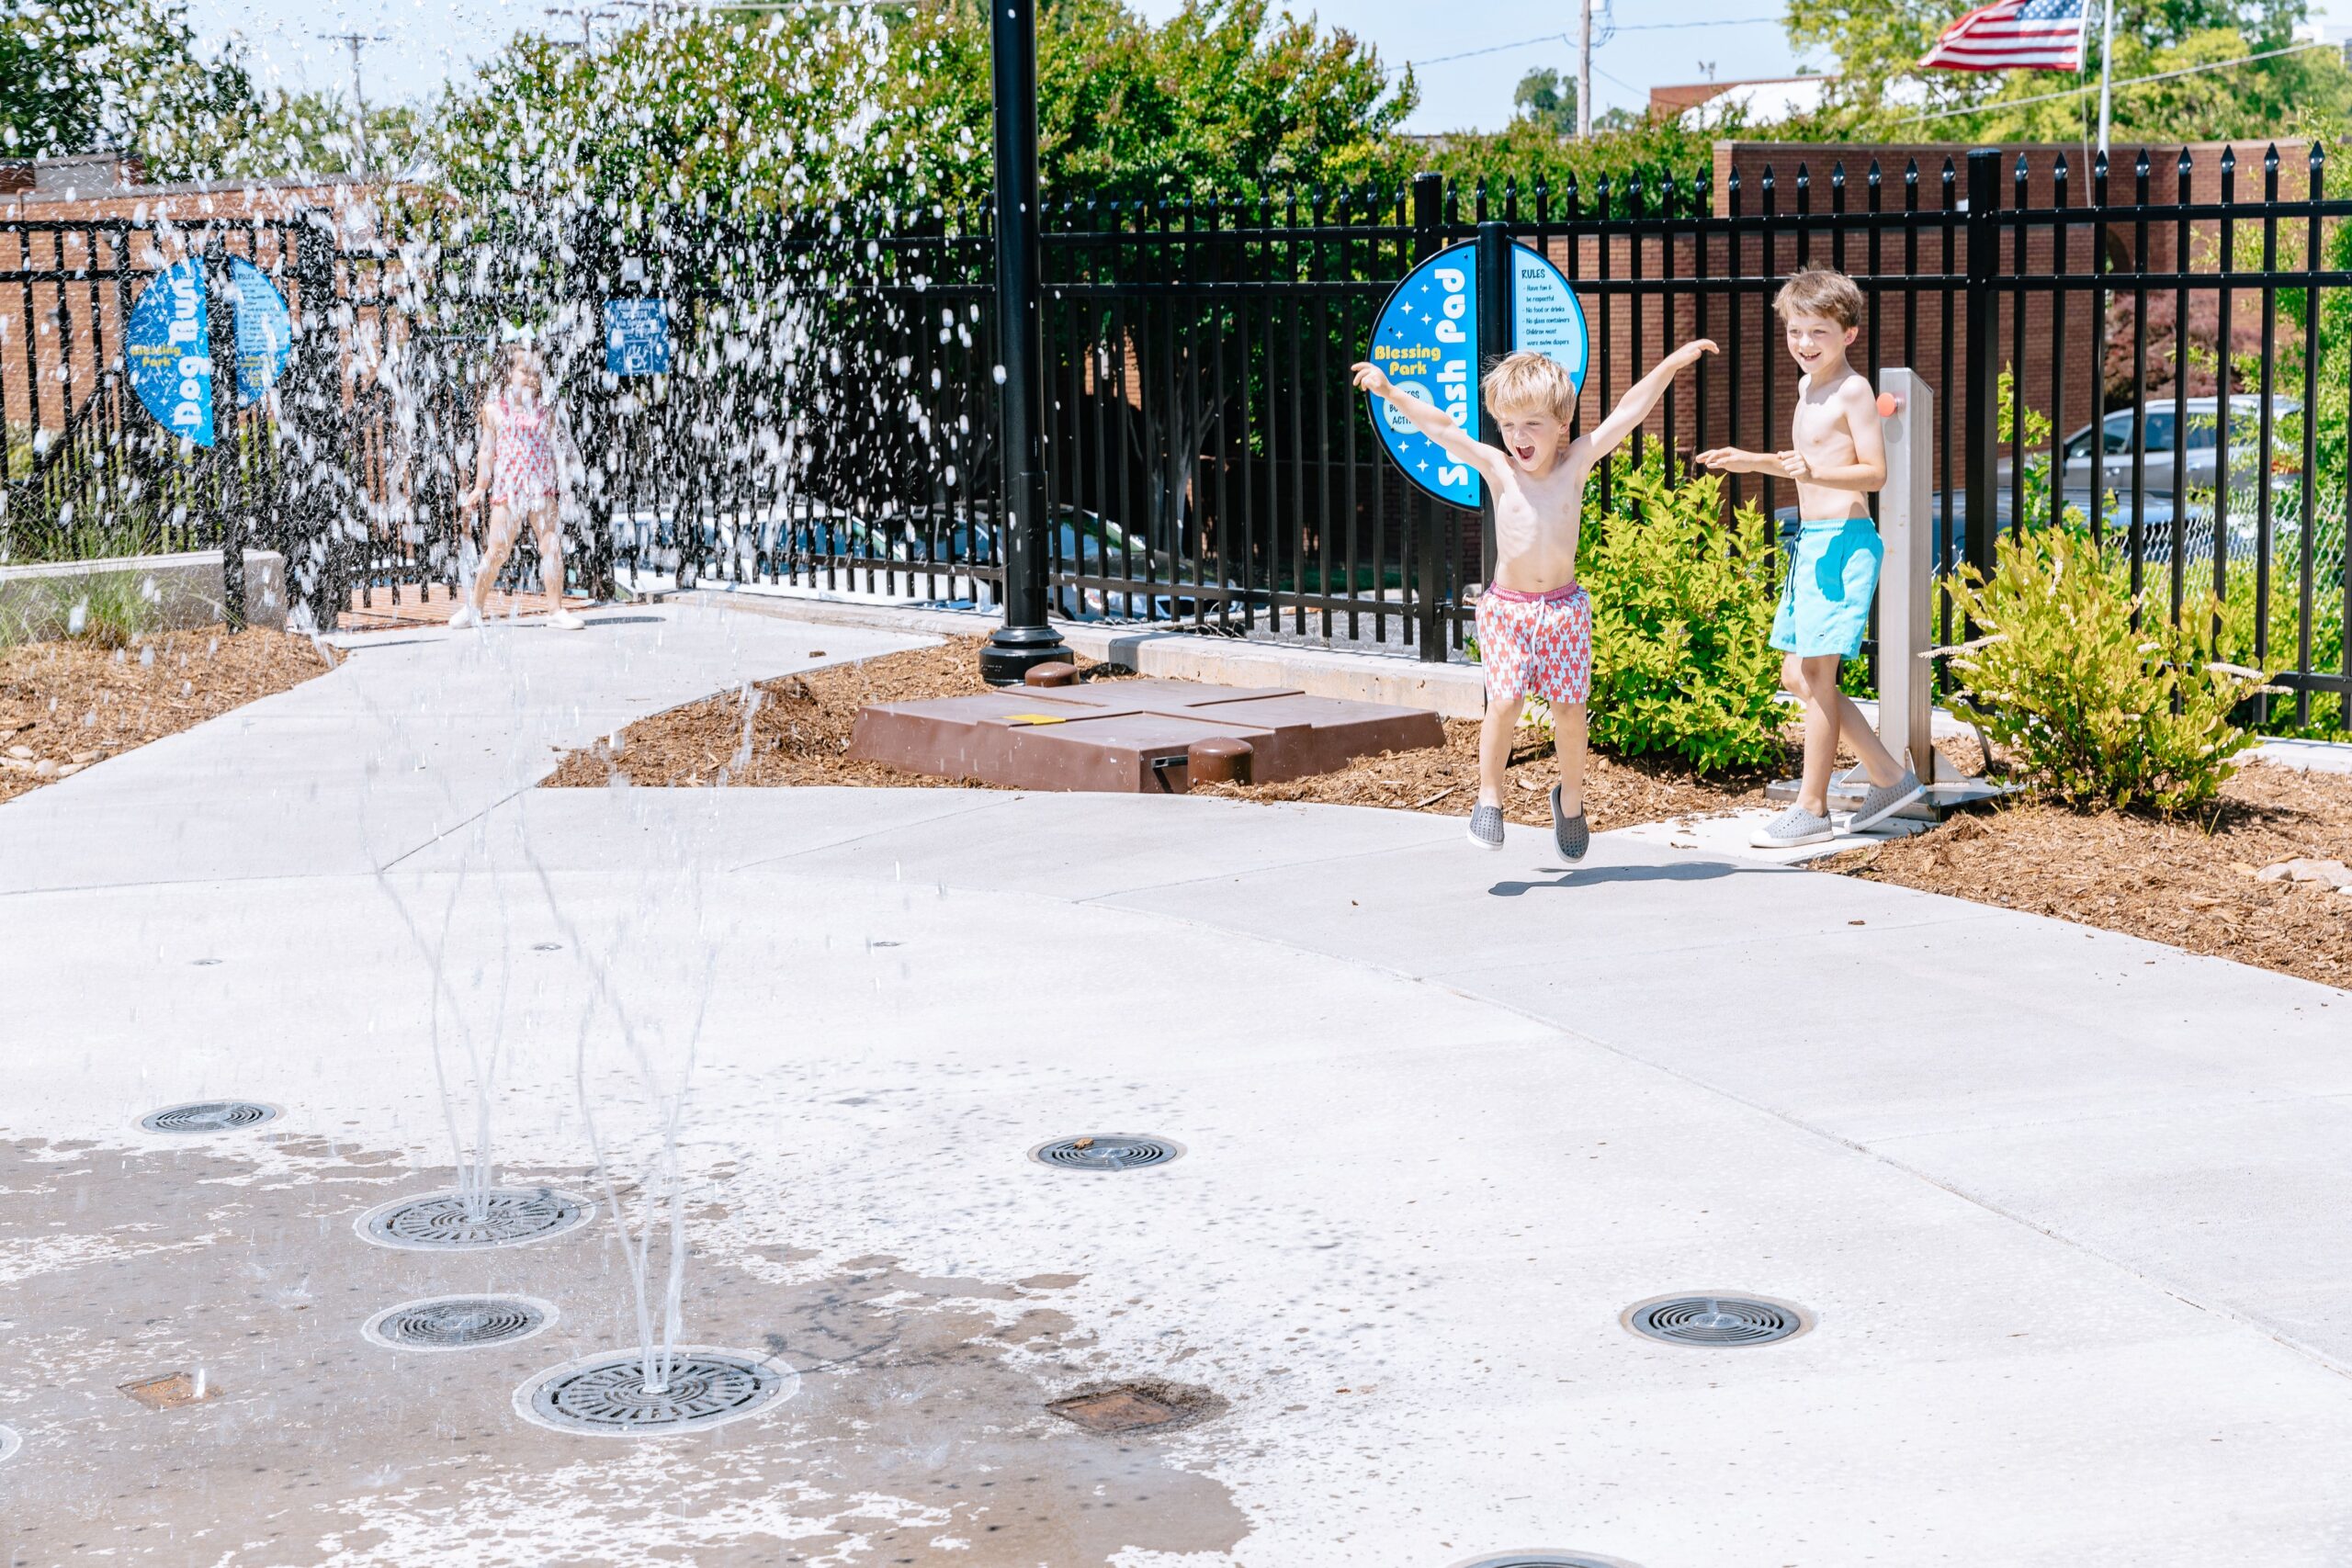 Things to do in High Point, NC for the summer include Blessing Park where children play in the splash pad at Truist Point and the Rockers Stadium.